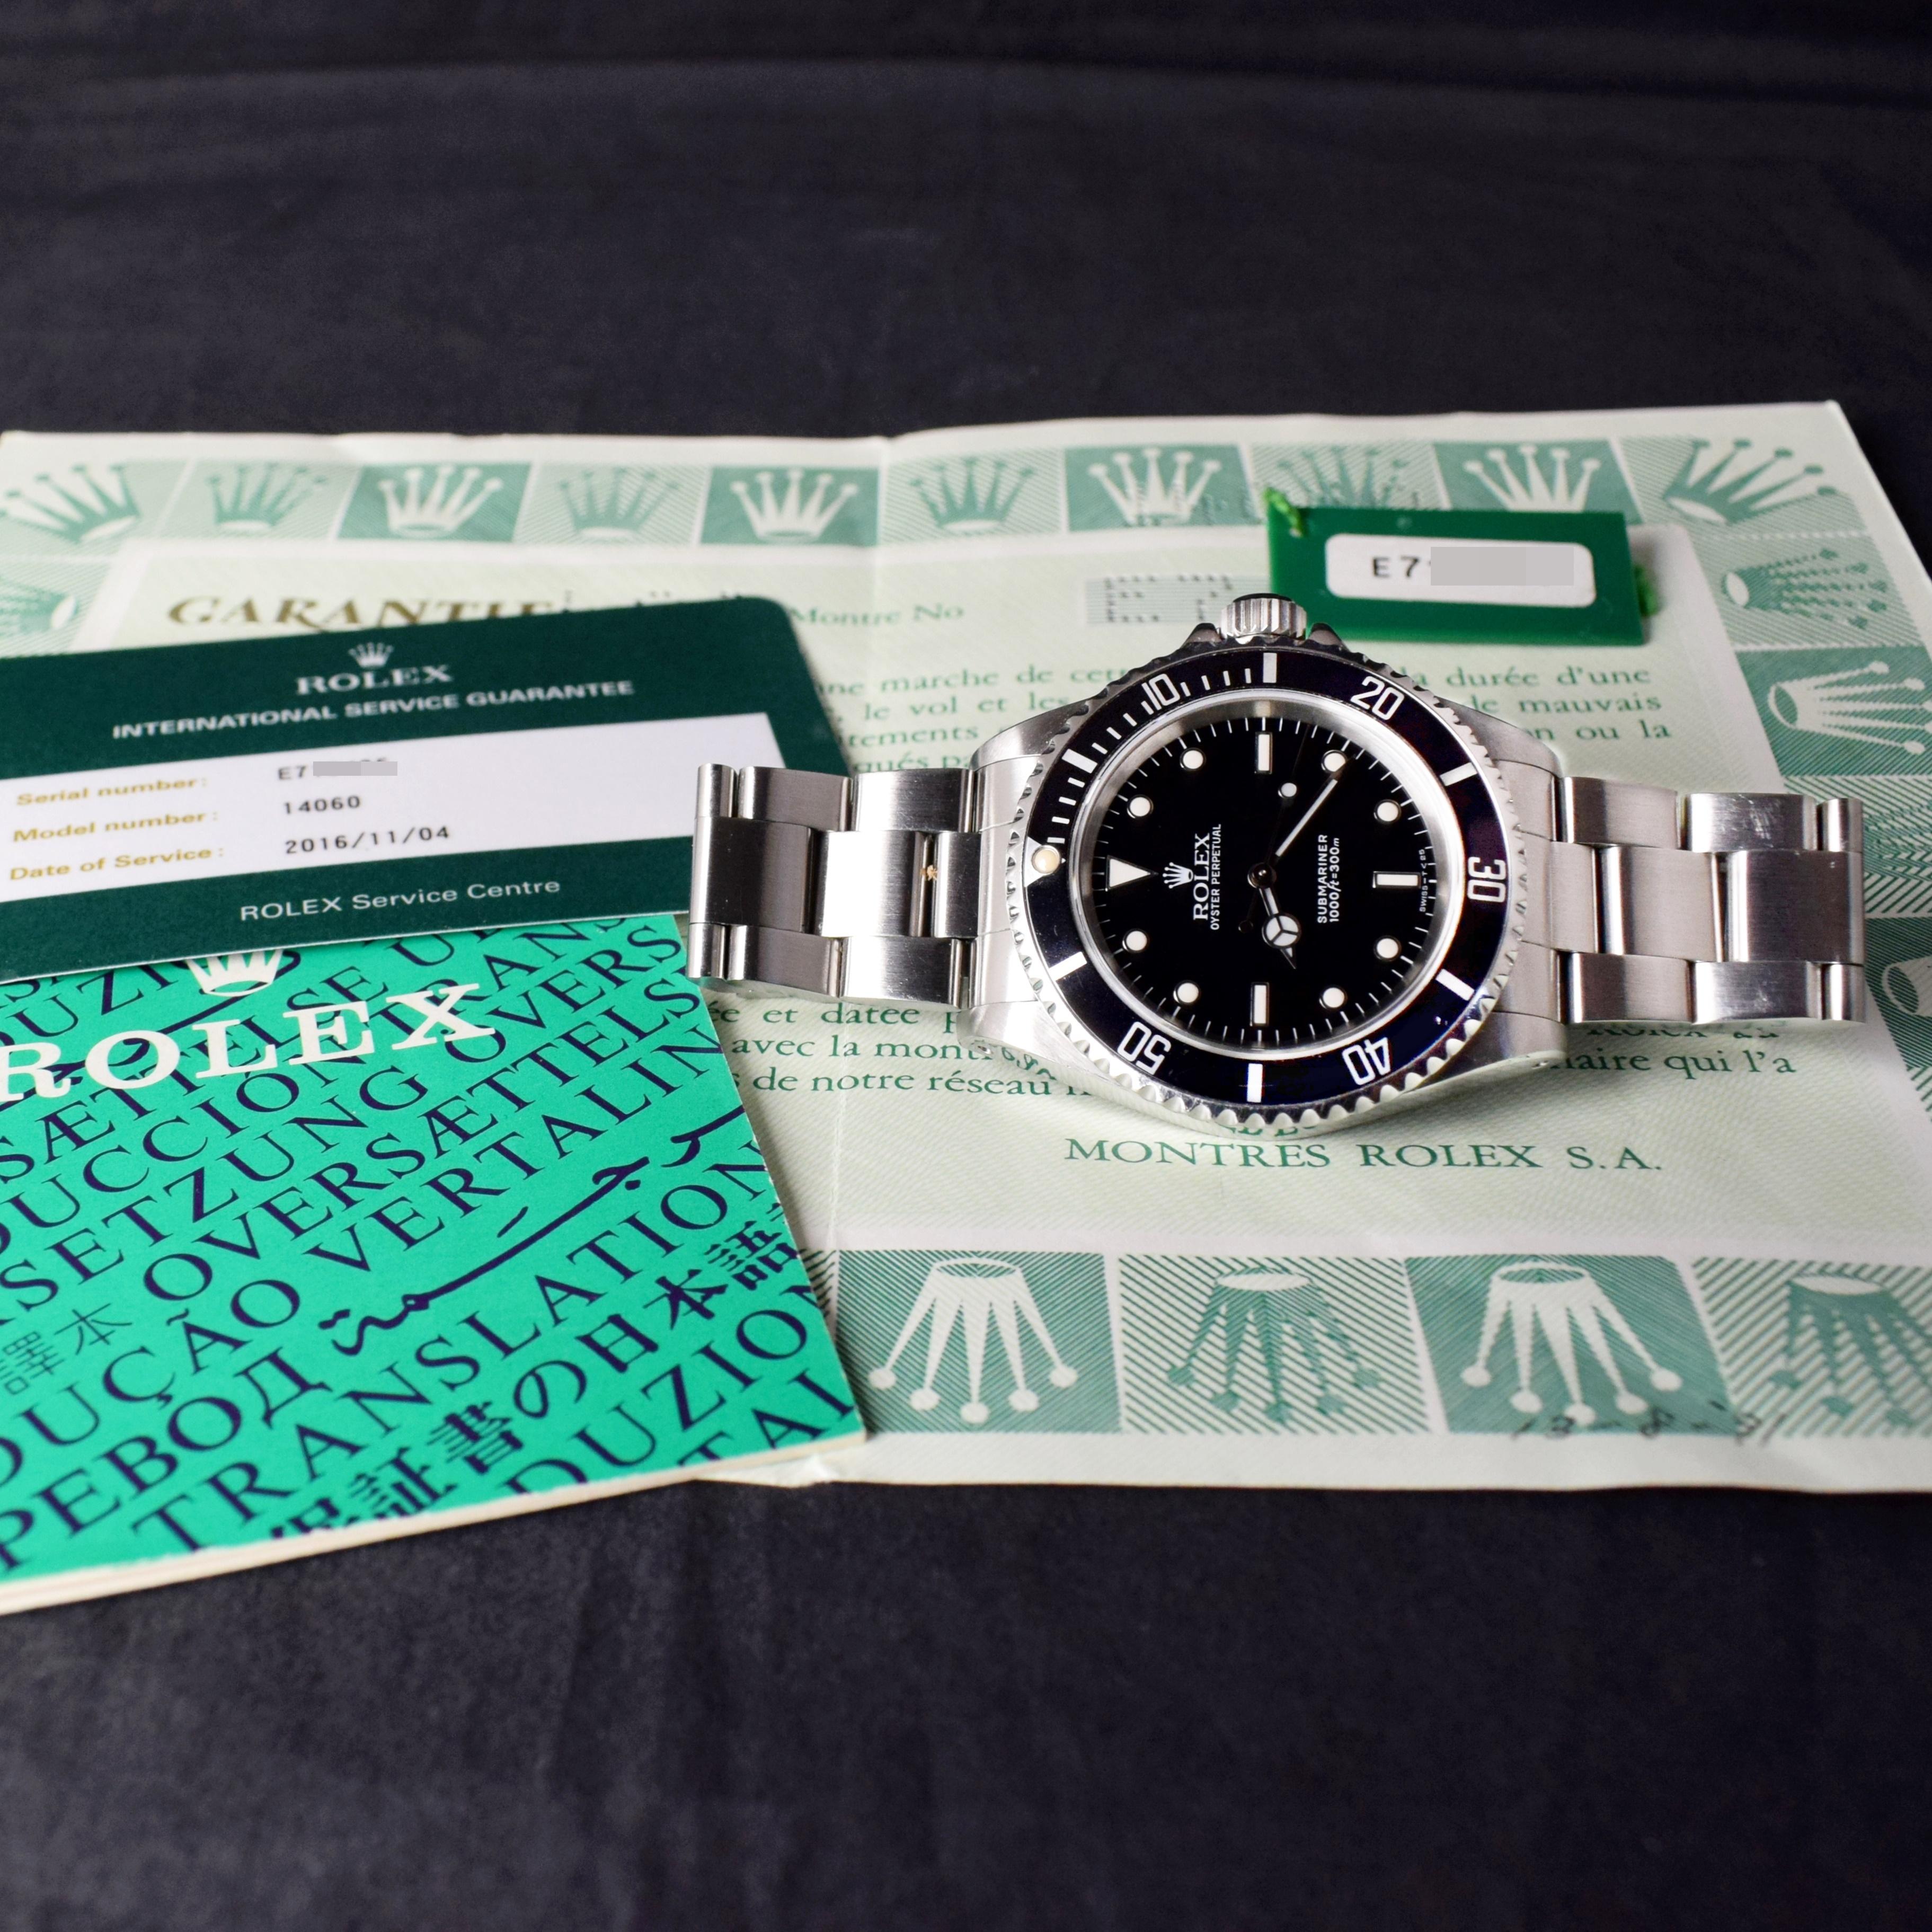 Brand: Rolex
Model: 14060
Year: 1990
Serial number: E7xxxxx
Reference: C03657
Case: Show sign of wear with slight polished from previous w/ inner case back stamped 14060
Dial: Excellent Condition Black Tritium Dial w/ luminova hands
Bracelet: 93150